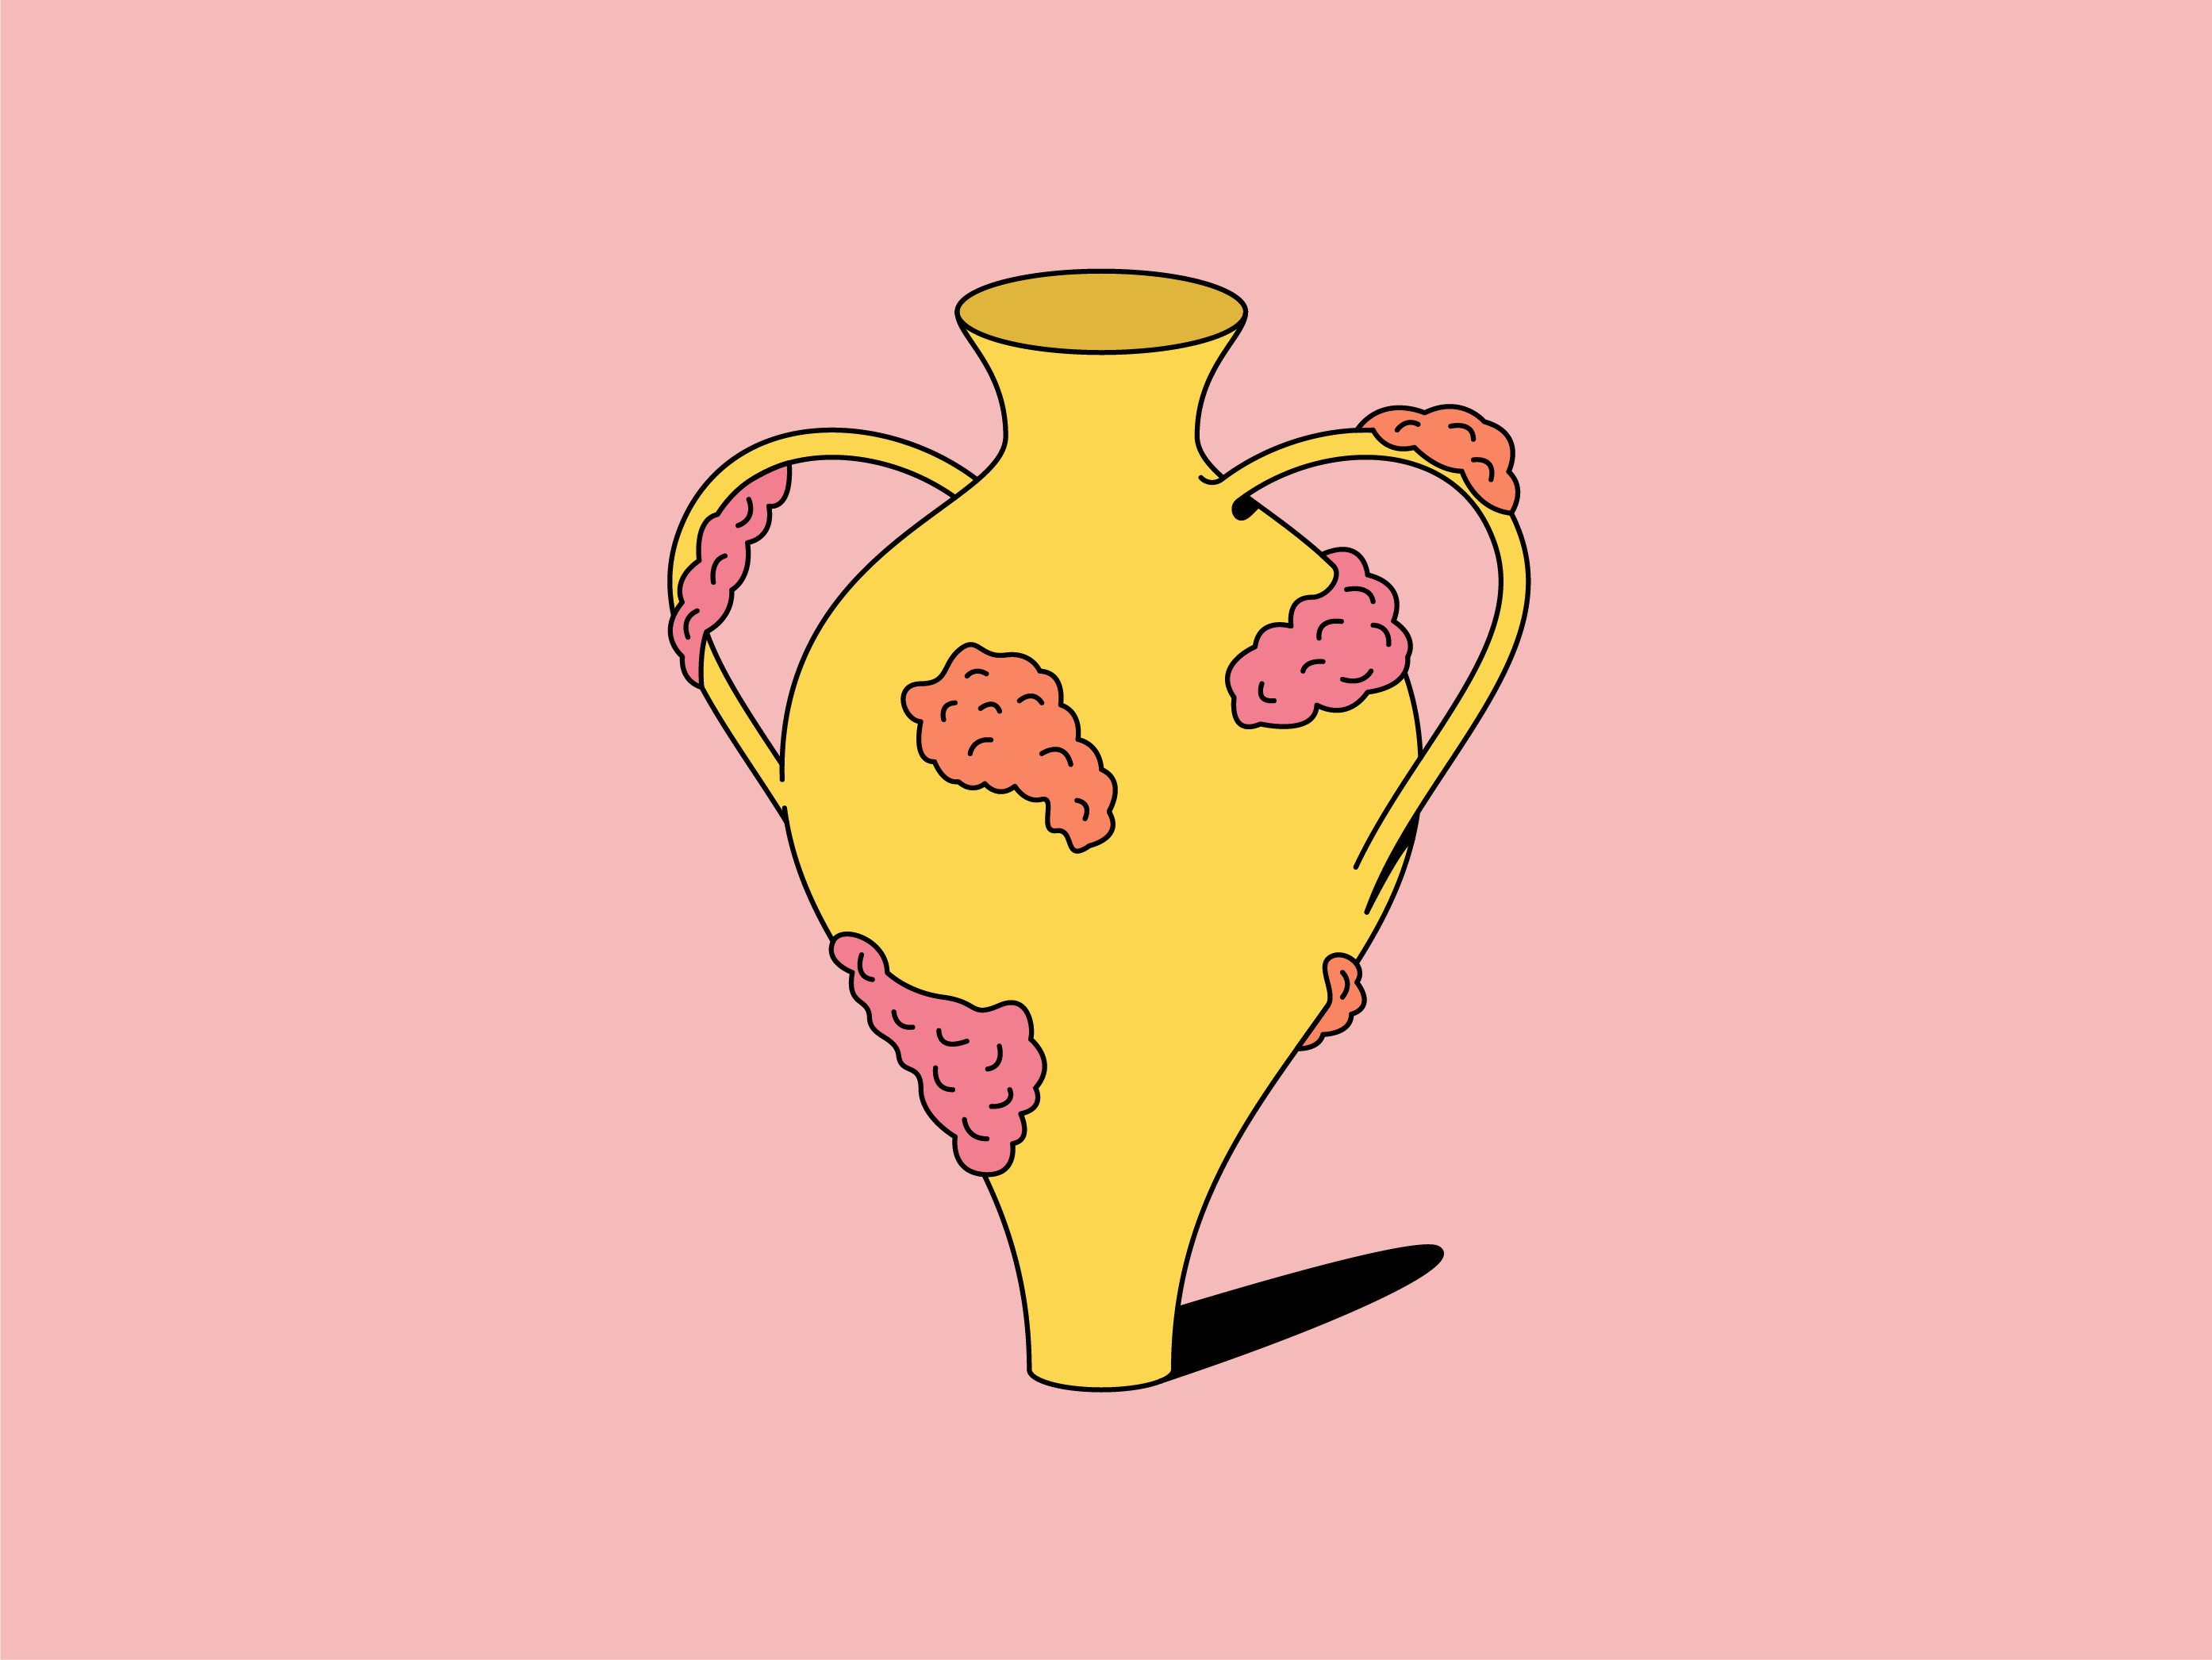 Thinx - Periodical - Endometriosis Isn’t Just a “Painful Period Disease”